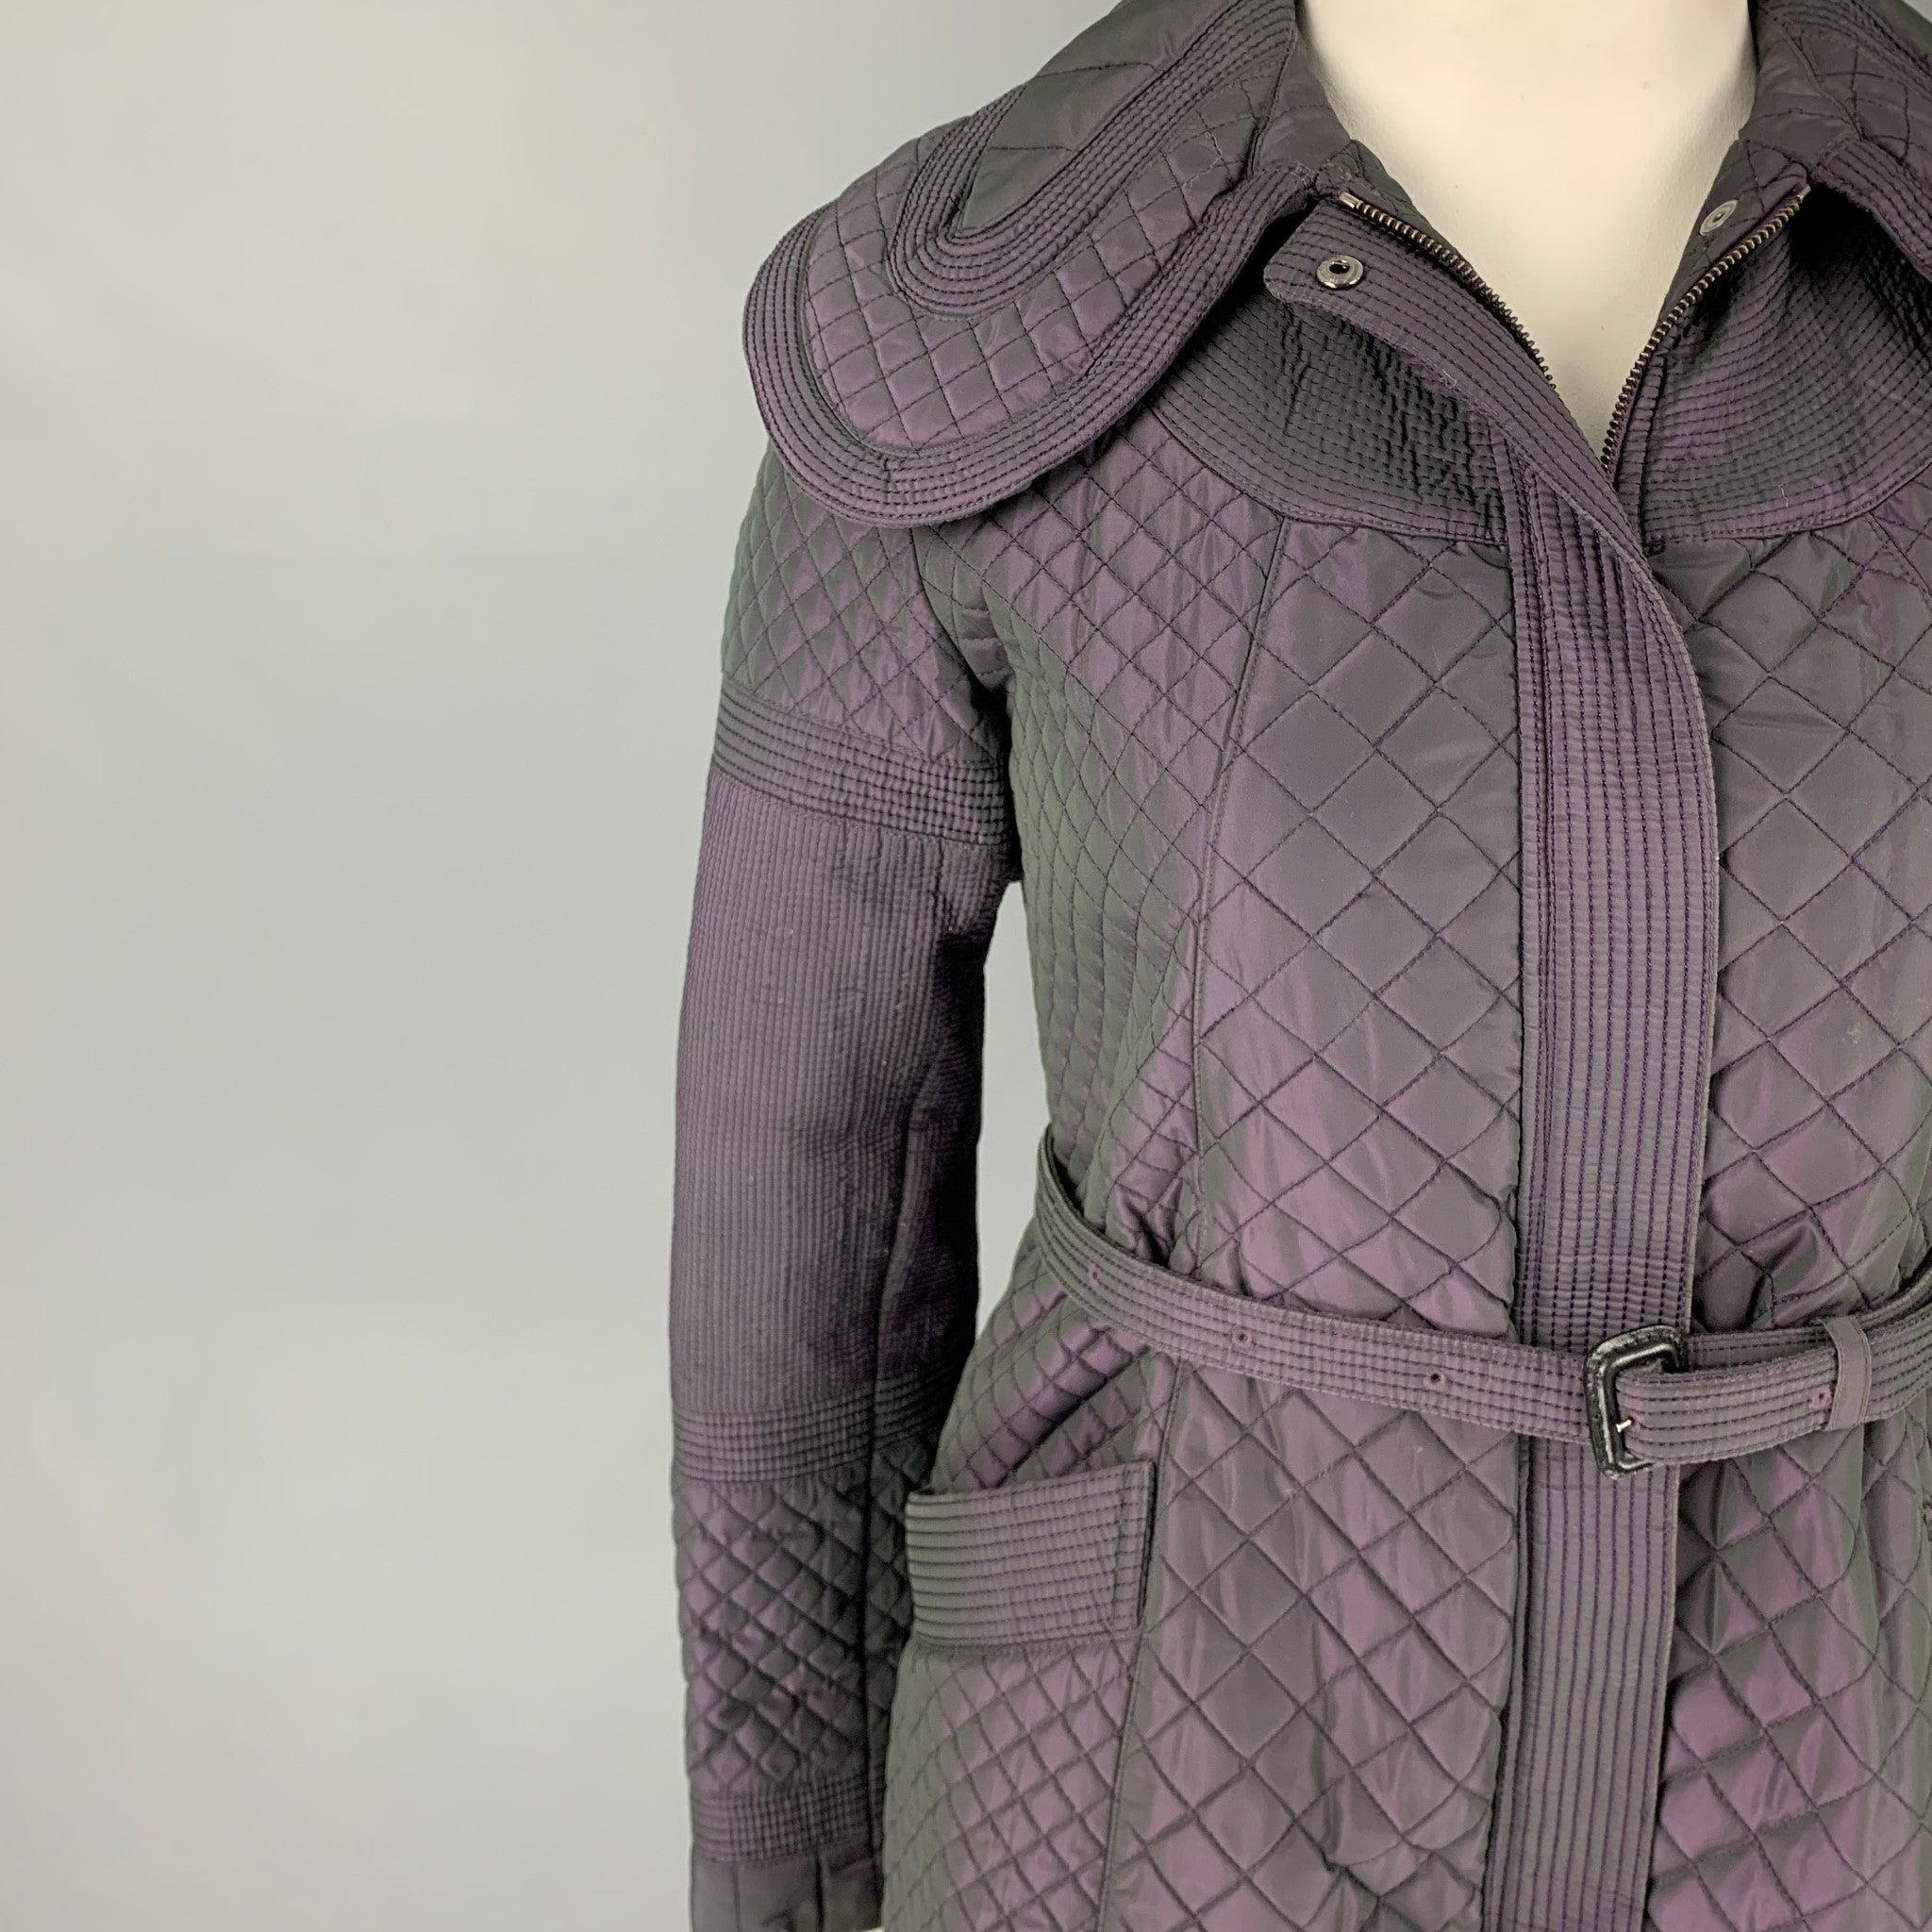 BURBERRY LONDON coat comes in a purple iridescent polyester featuring a quilted design, large collar, belted, patch pockets, and a zip & snap button closure.
Very Good
Pre-Owned Condition. 

Marked:   UK 14 / USA 12 / IT 46 / GER 42 / FRA 44